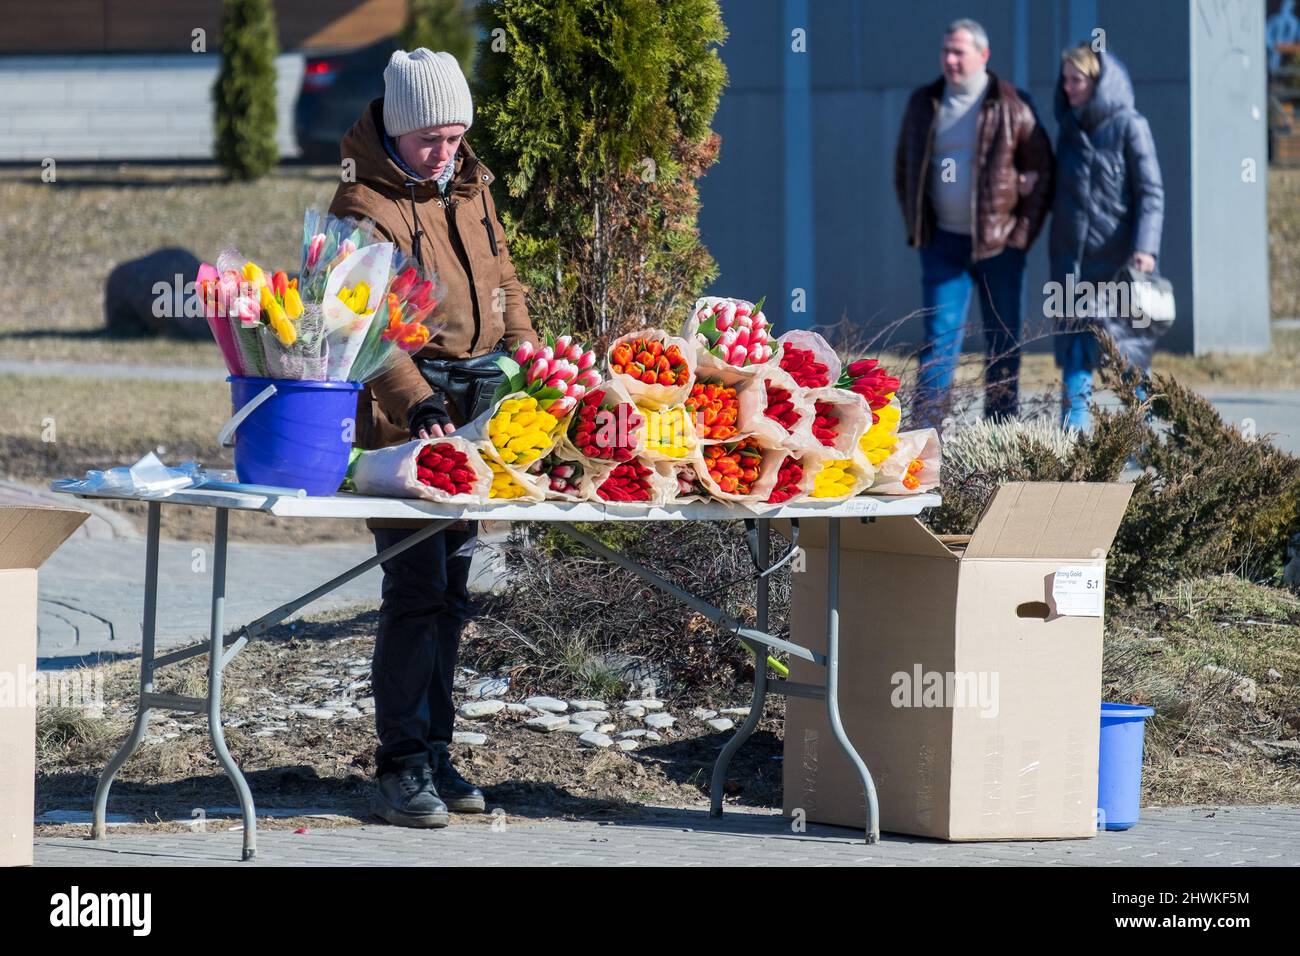 MINSK, BELARUS - MARCH 05, 2022: A woman sells flowers (tulips) on the street. The International Women's Day holiday is March 8. Stock Photo